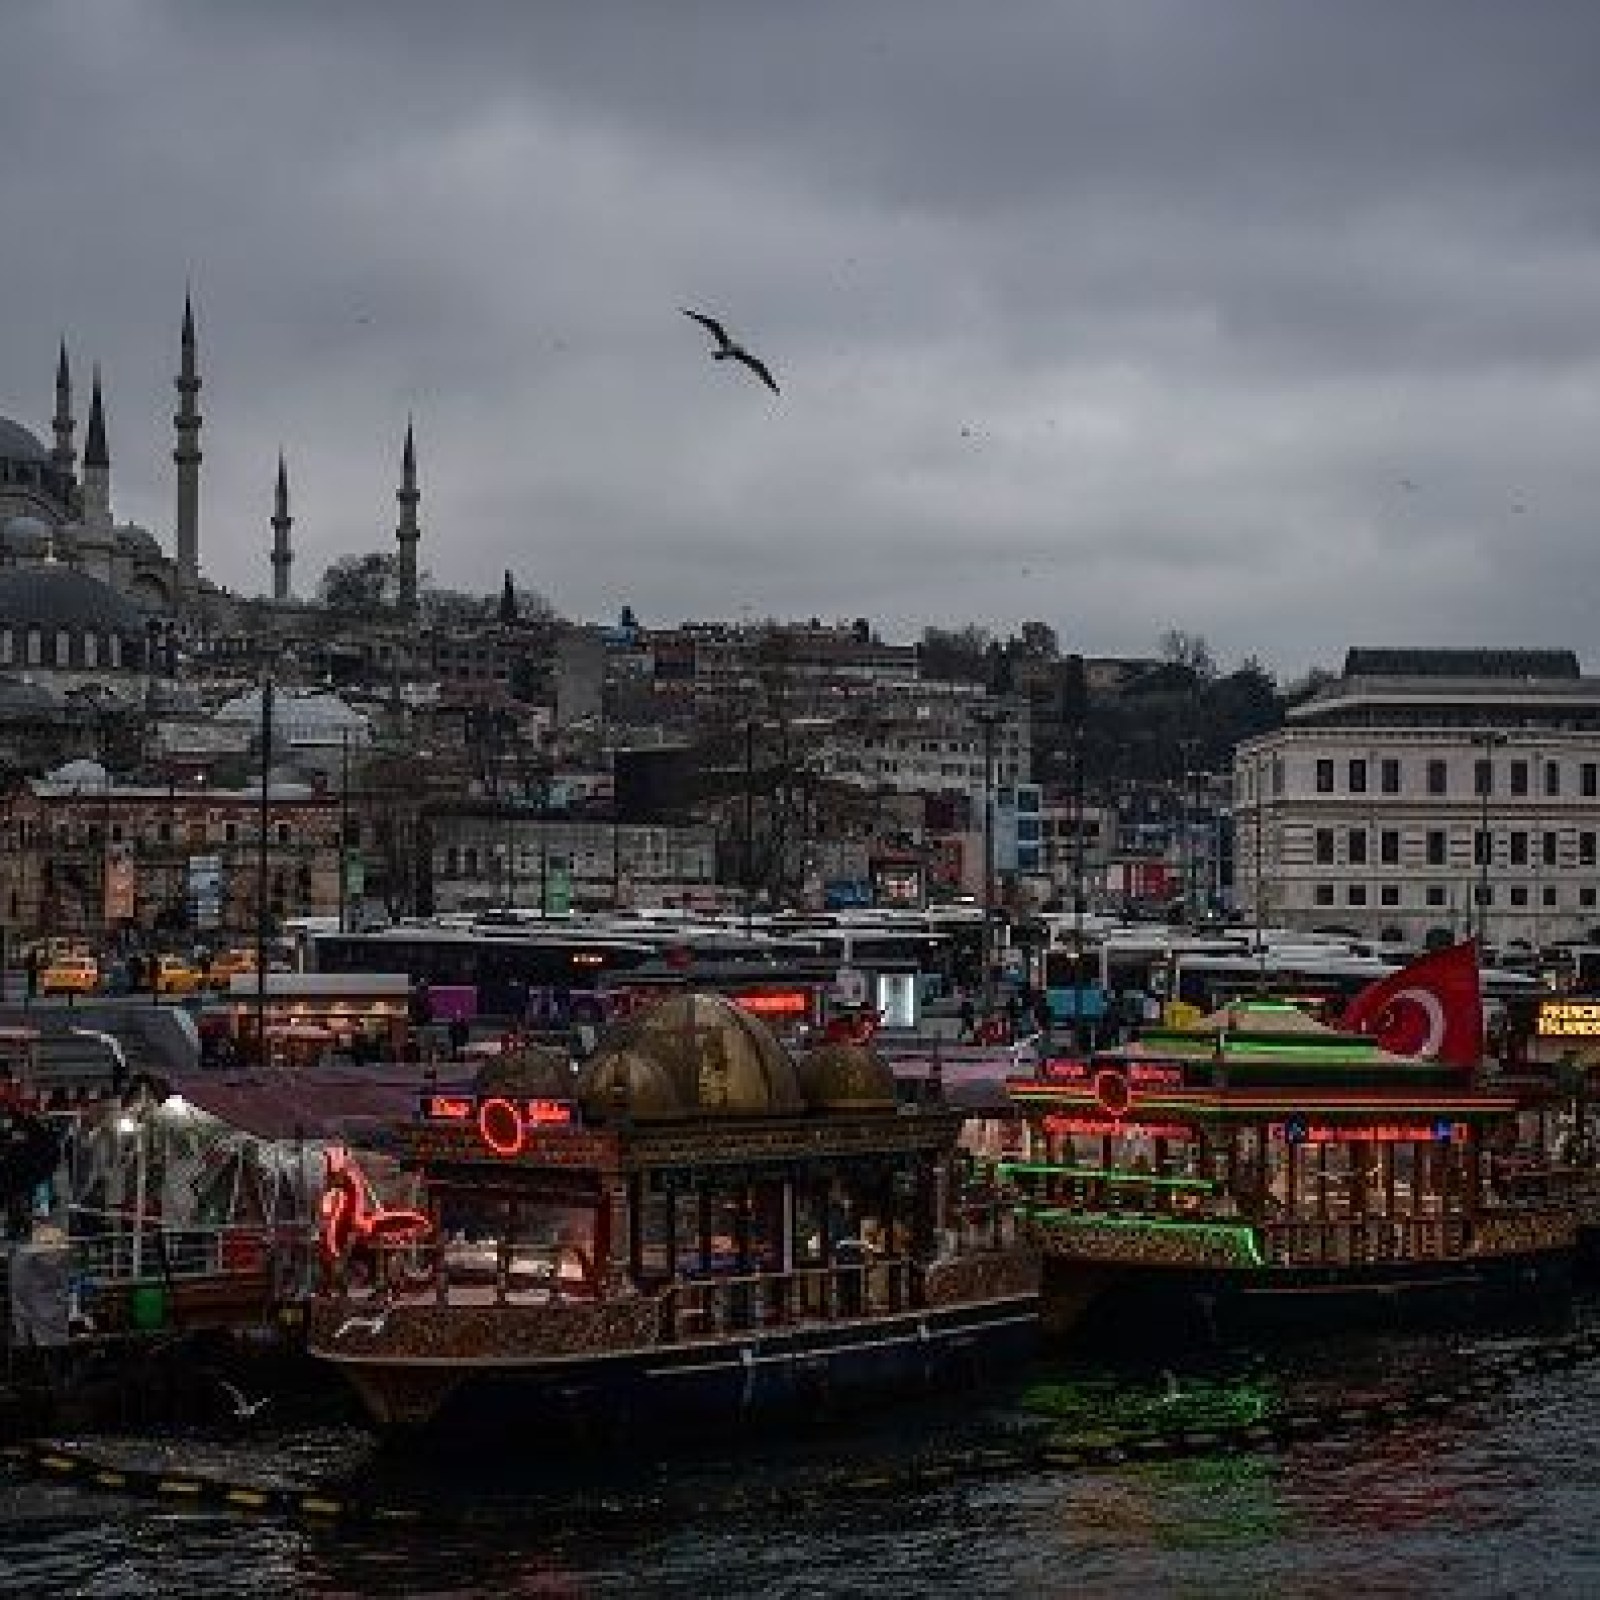 Sex of many in Istanbul